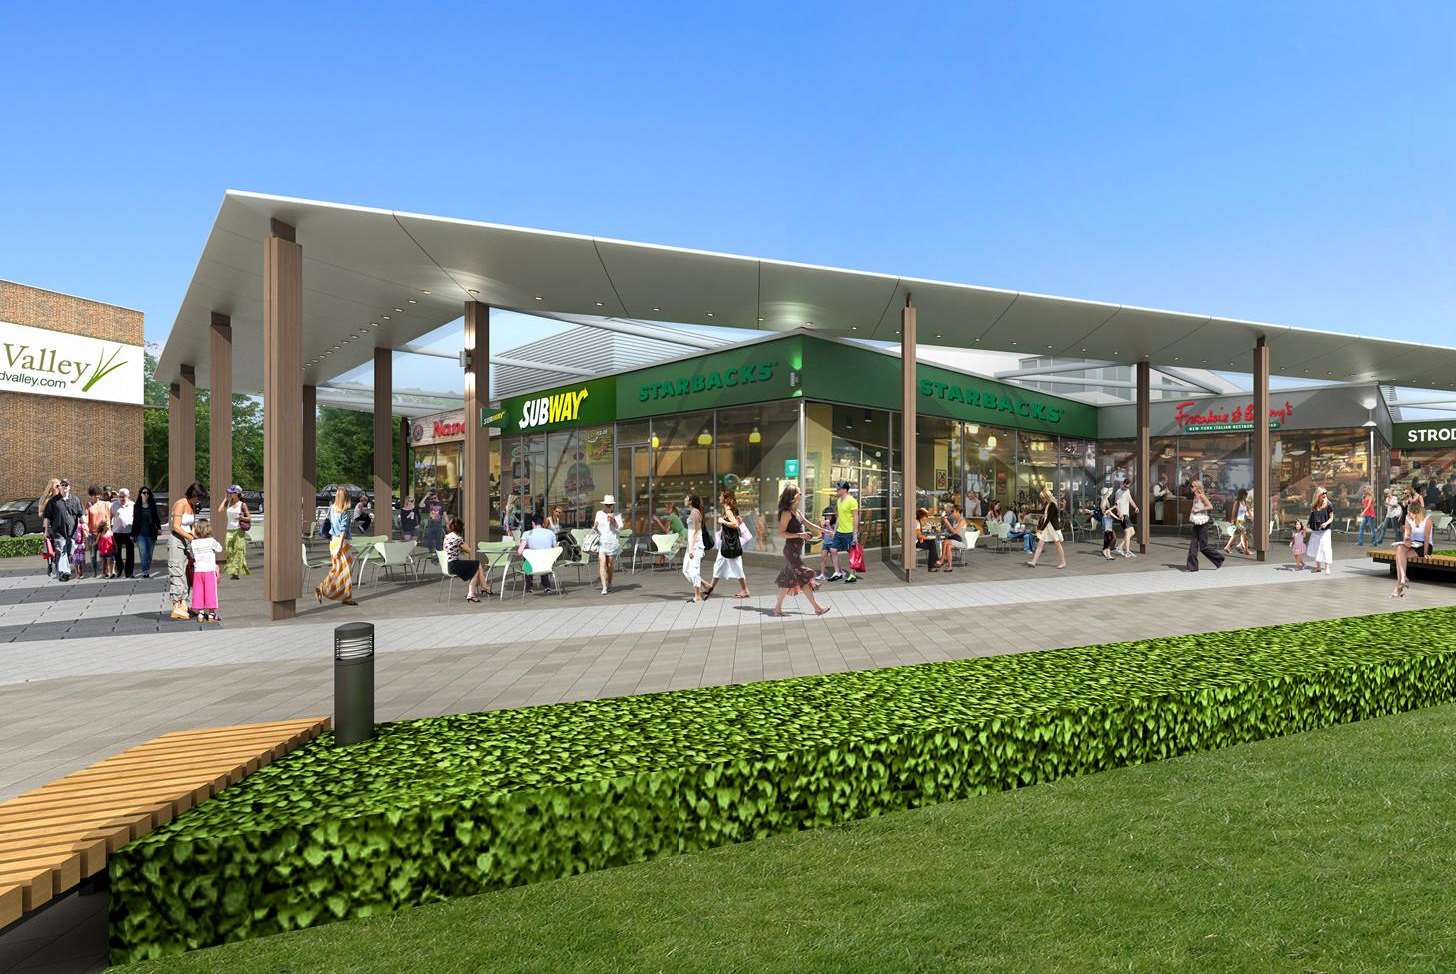 How the new restaurant units at Hempstead Valley Shopping Centre will look